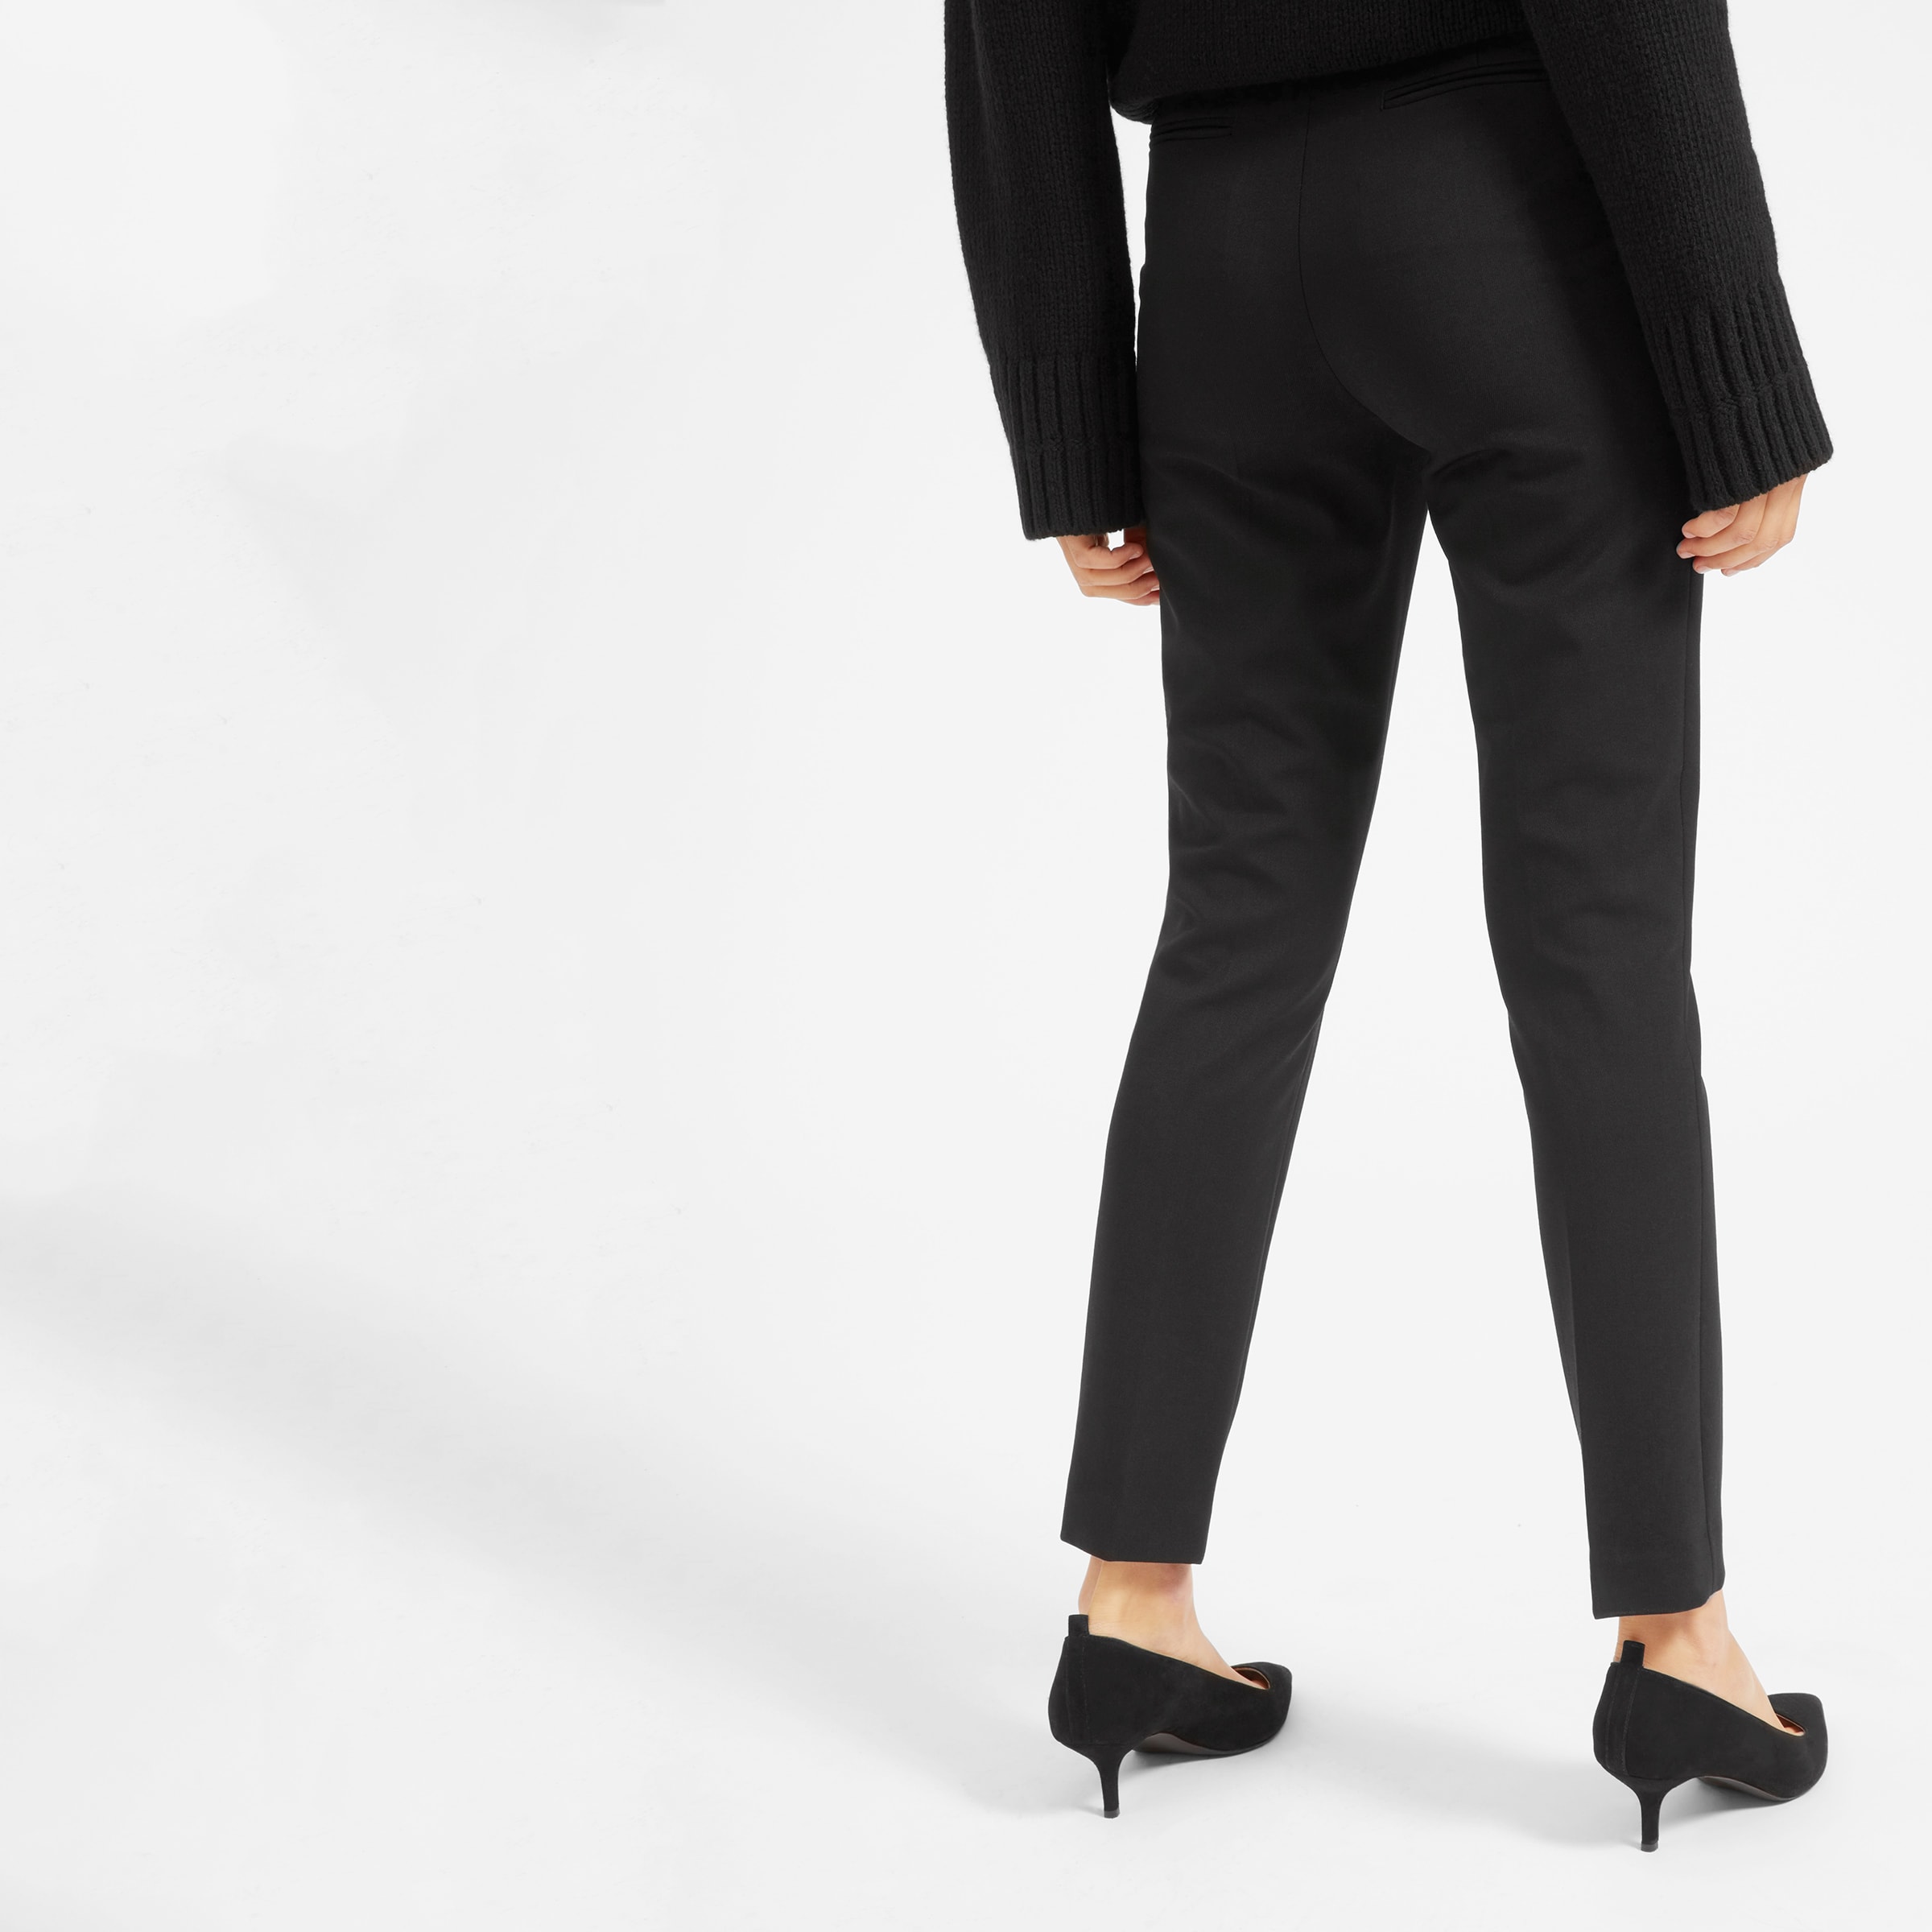 10 Best Black Dress Pants You Can Buy In 2022